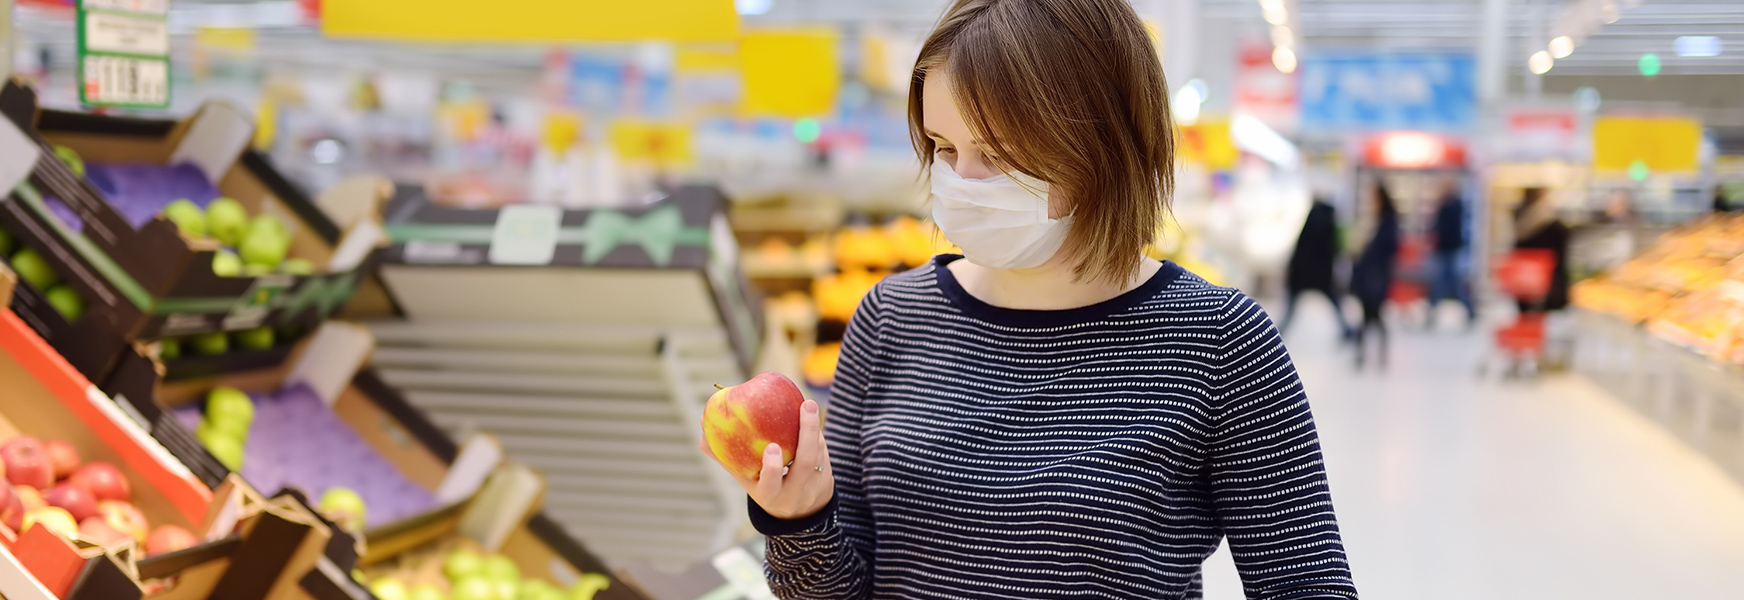 Young woman wearing a mask, shopping for fruit at a supermarket